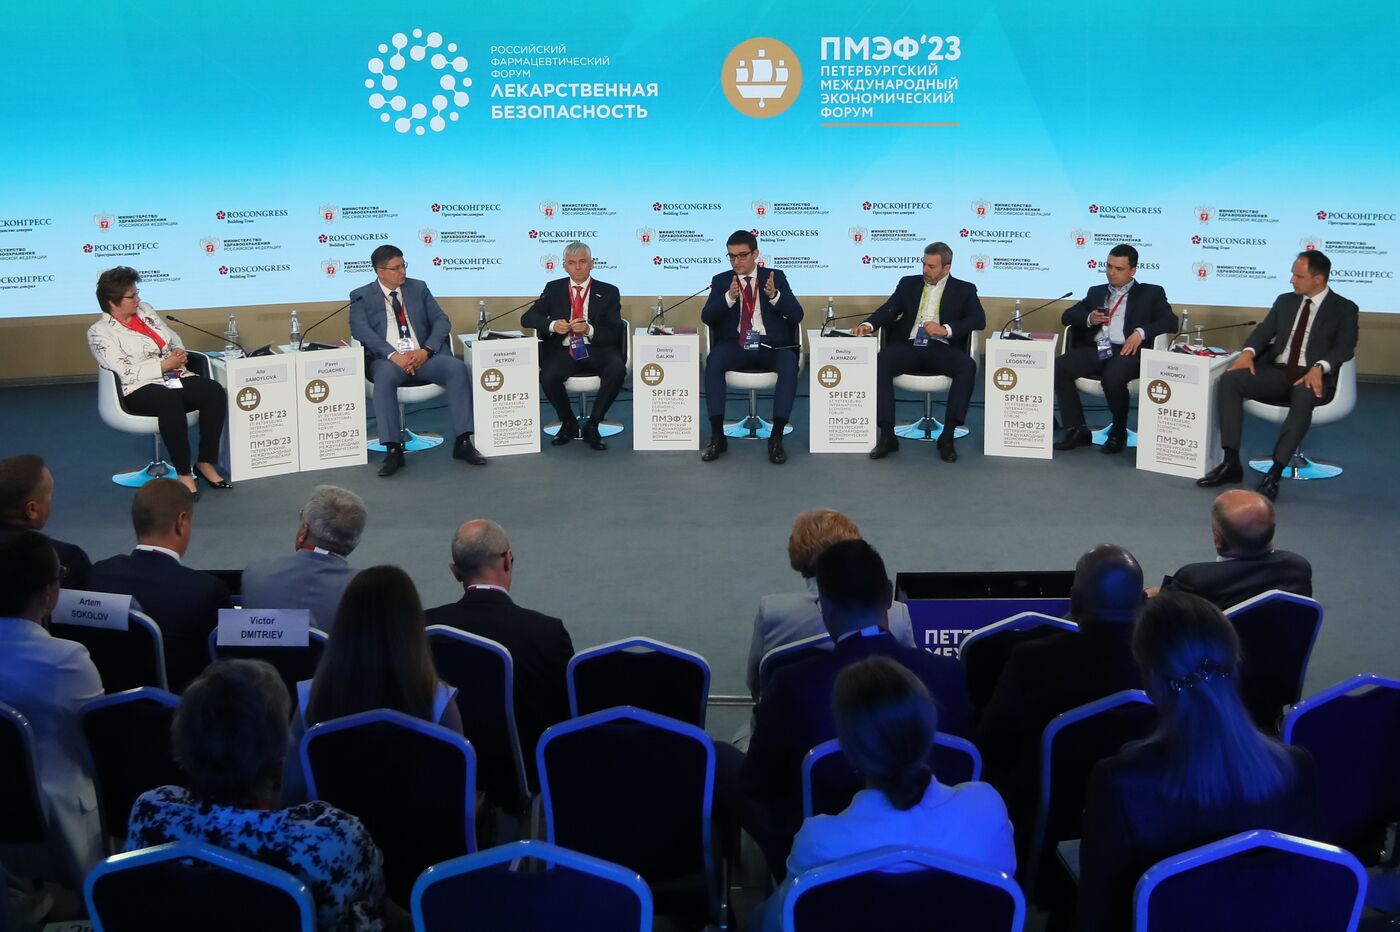 SPIEF-2023. Priorities for Digital Transformation of the Pharmaceutical Market